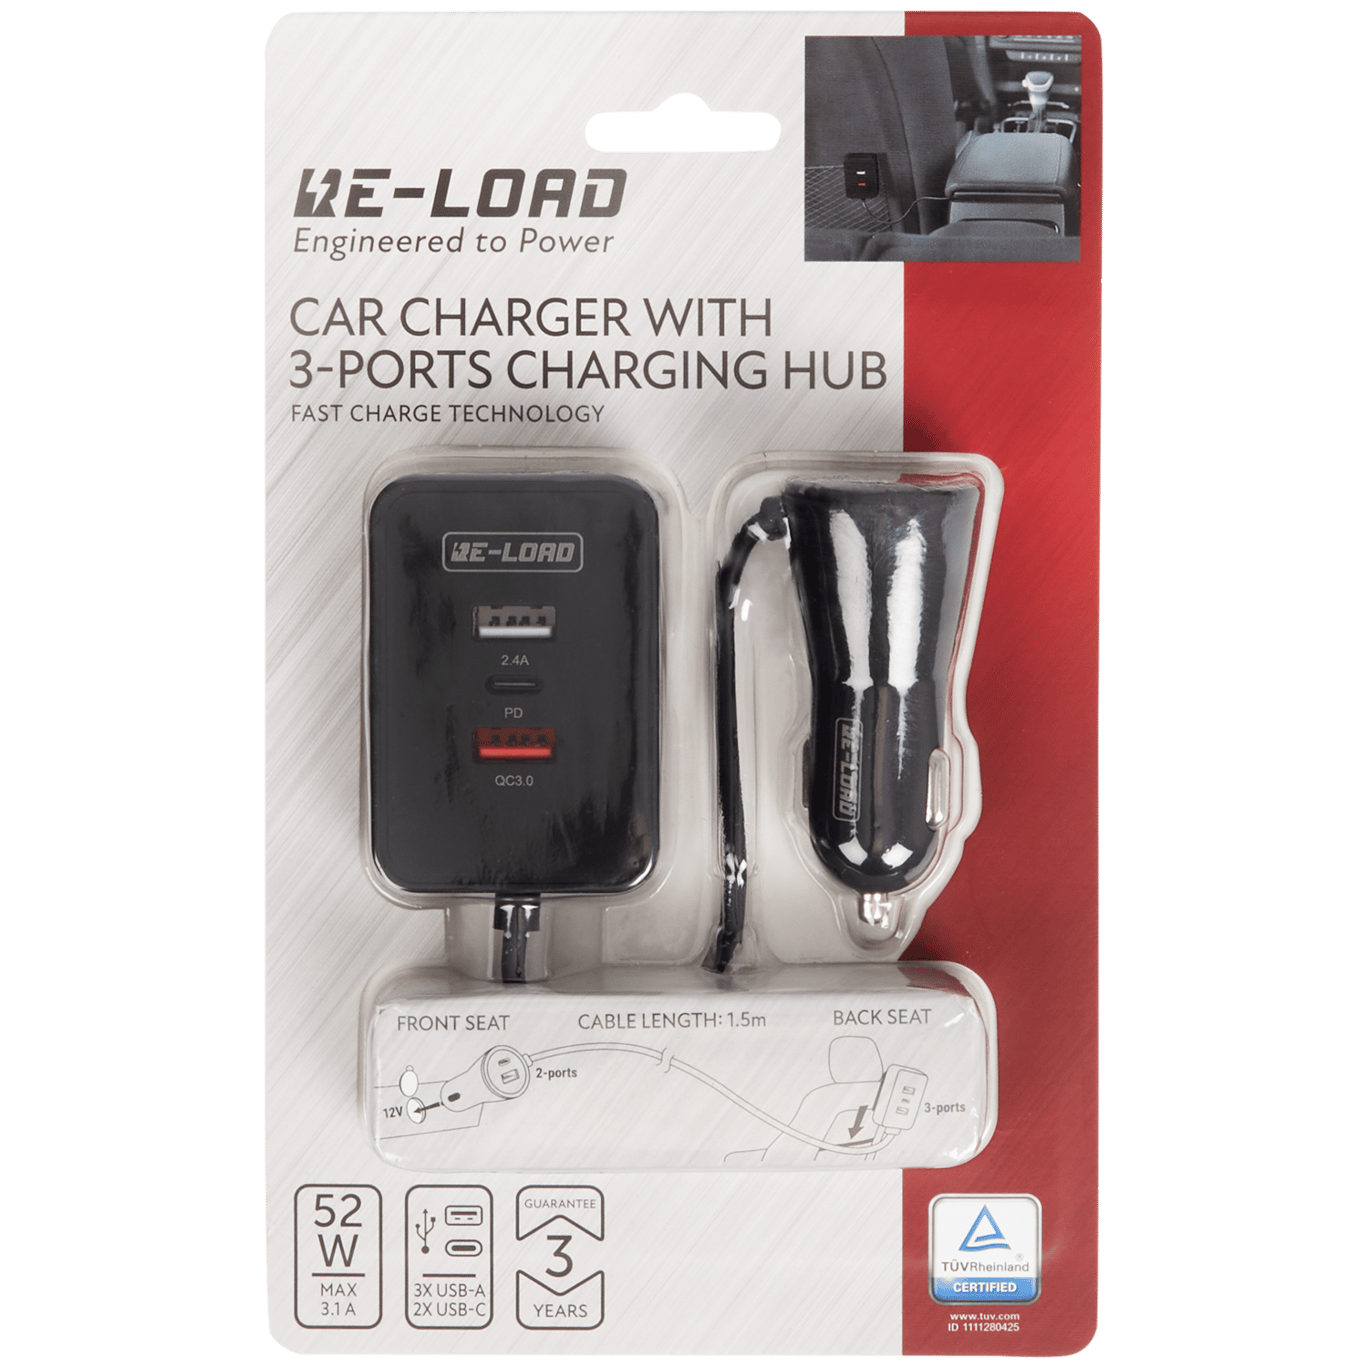 Chargeur allume-cigare avec hub Re-load